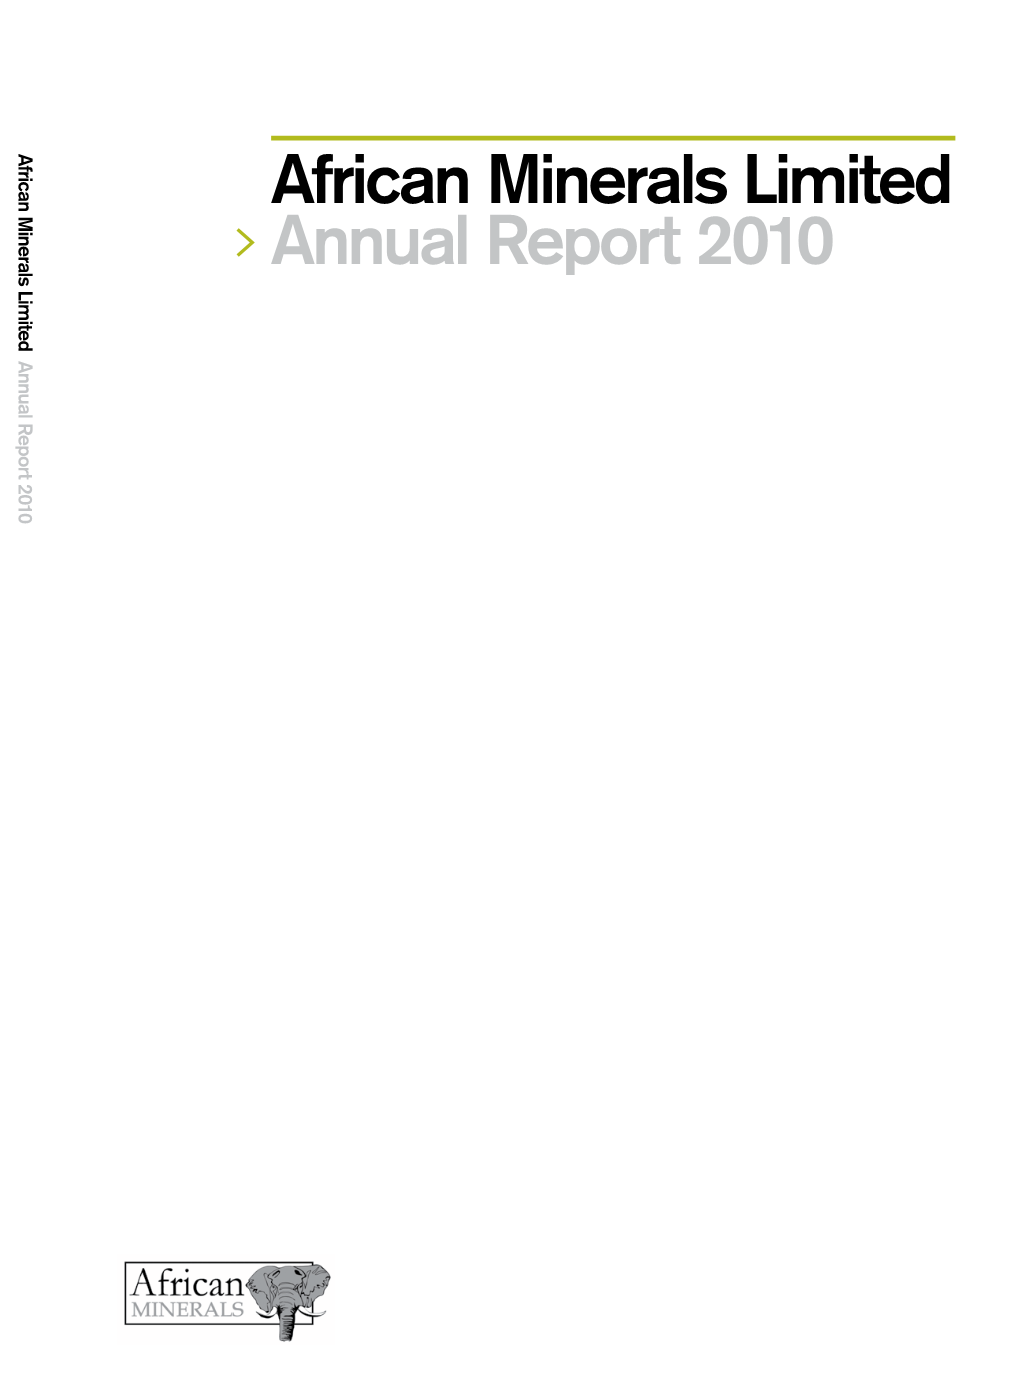 African Minerals Limited Annual Report 2010